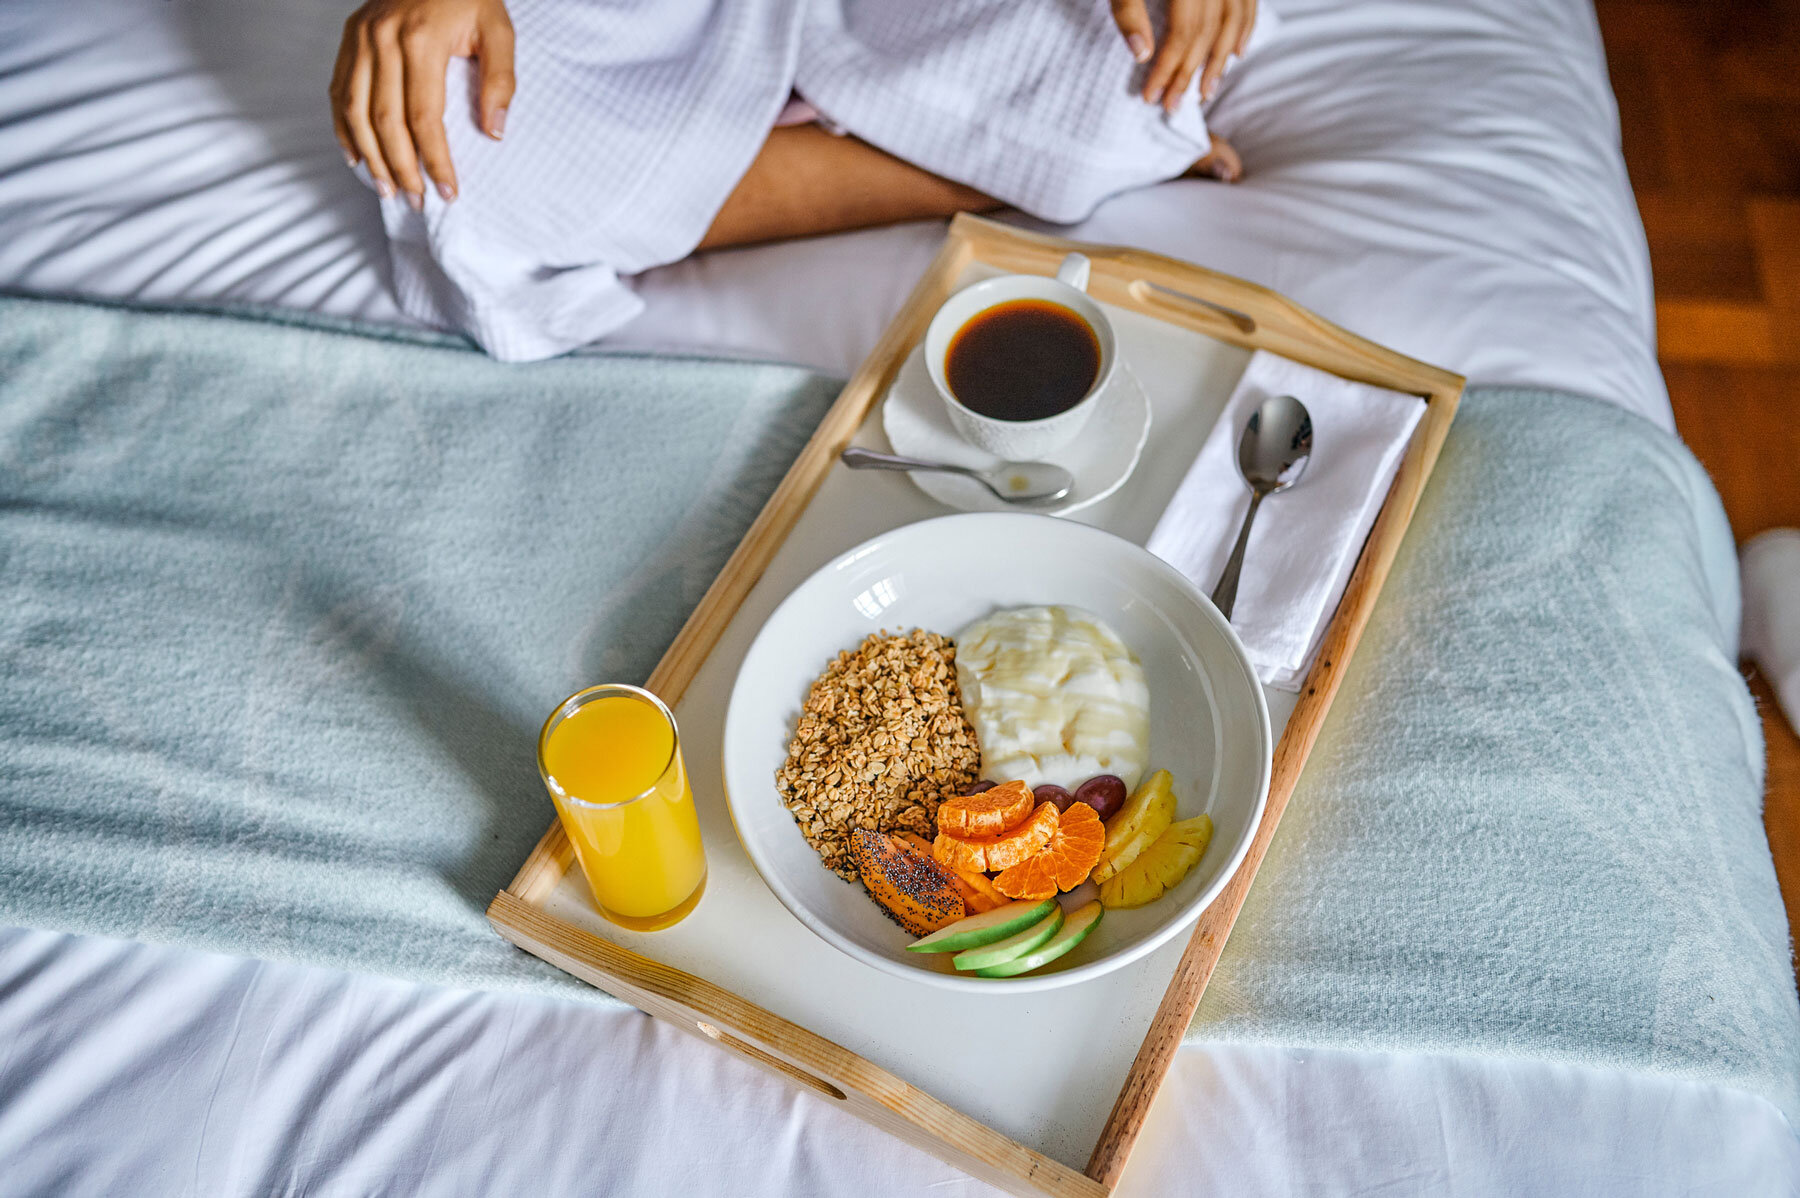 Breakfast on a tray served in bed